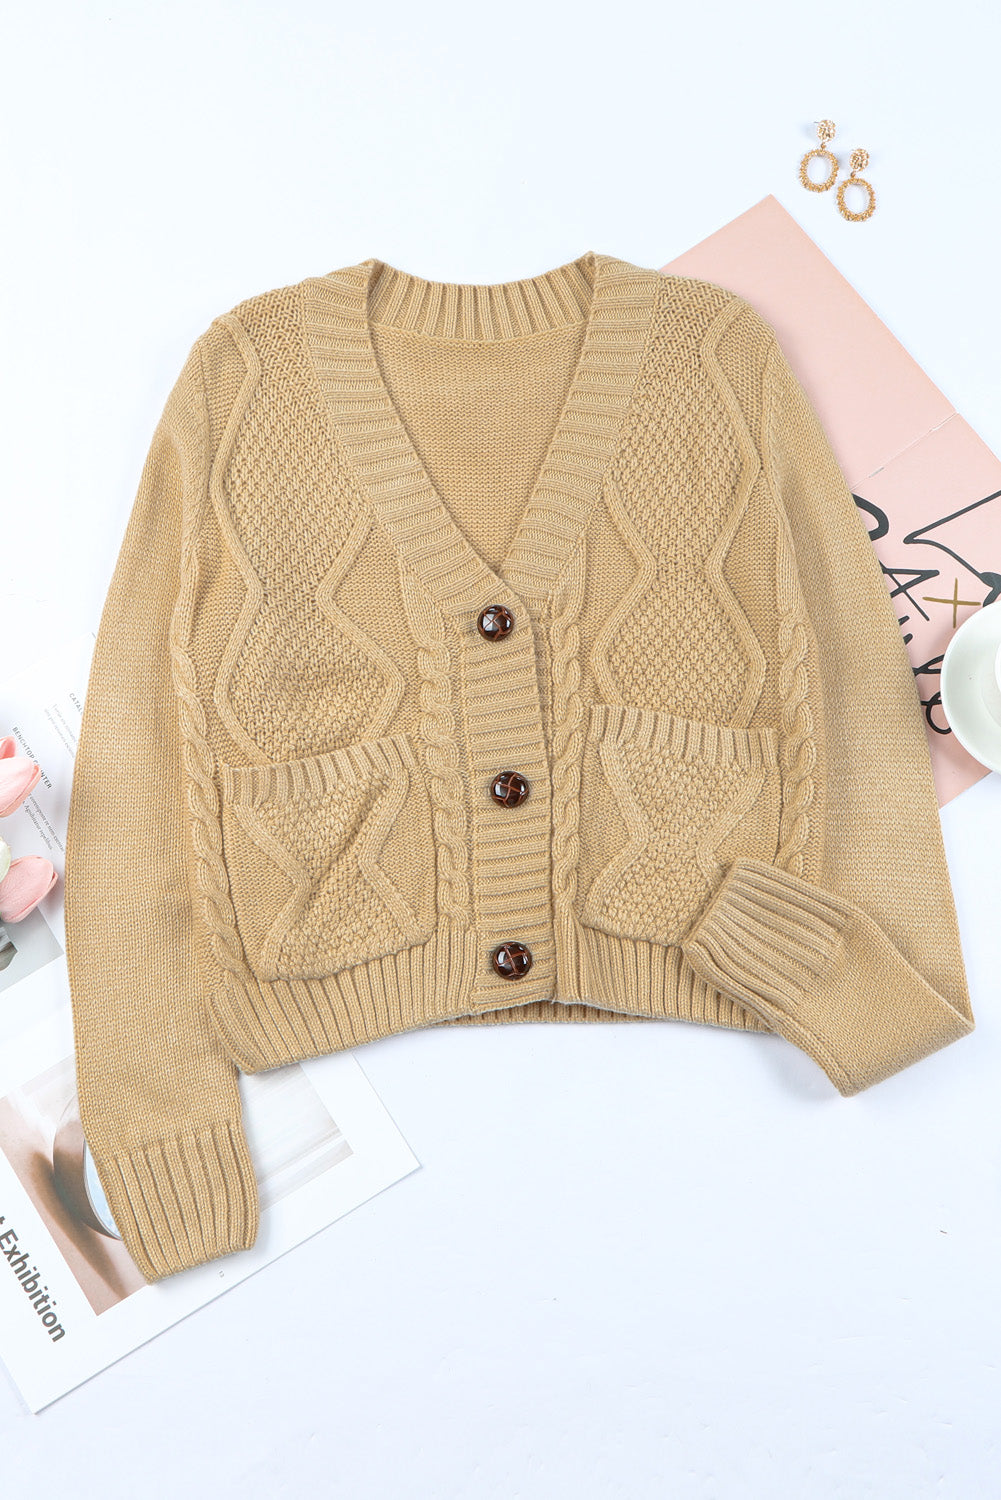 Beige Front Pockets Buttons Textured Cardigan Sweaters & Cardigans JT's Designer Fashion